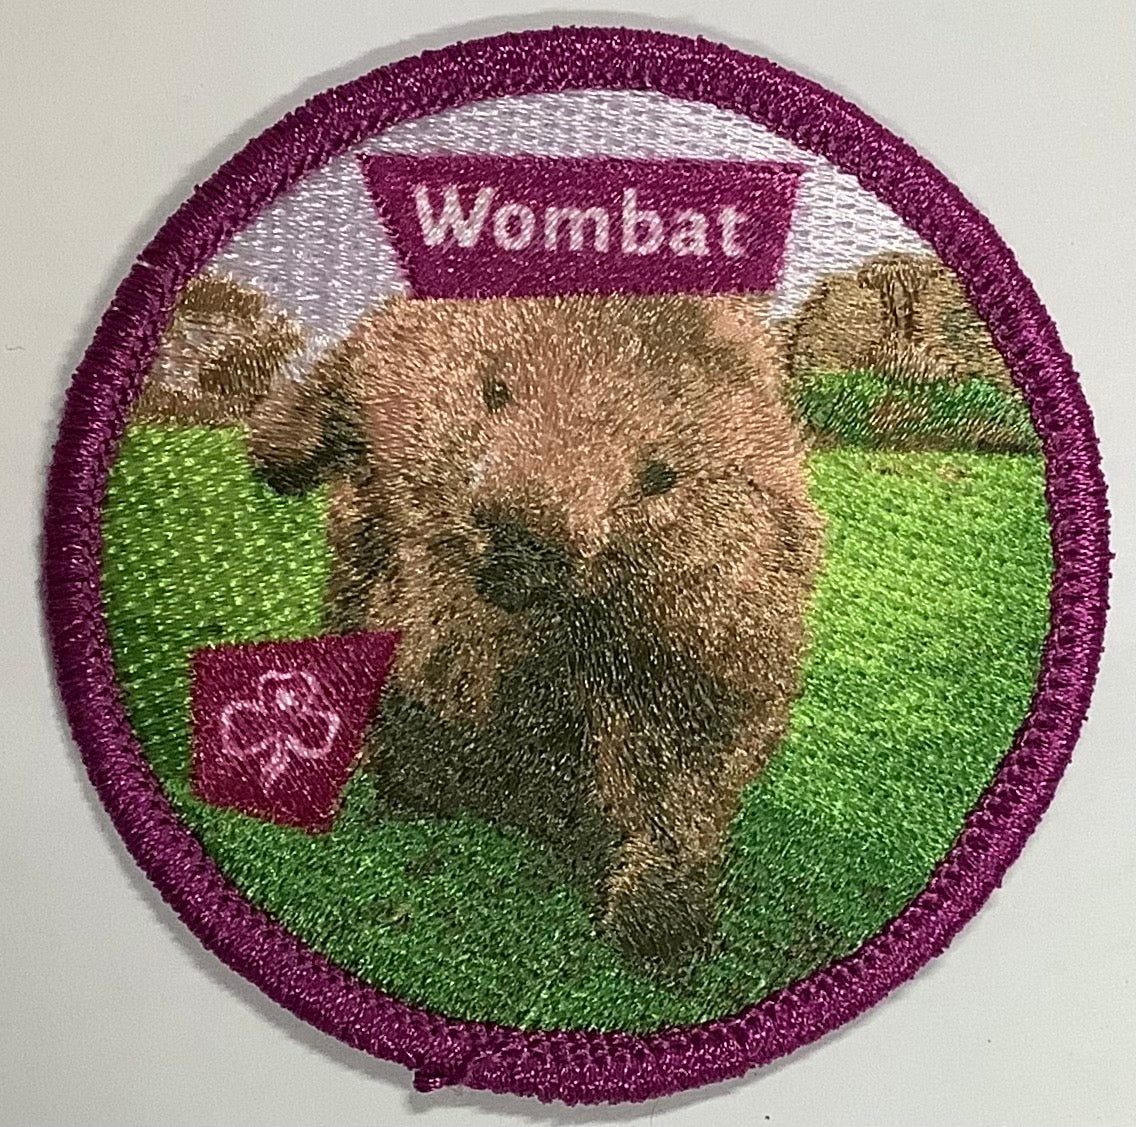 a round badge bound in purple with a wombat